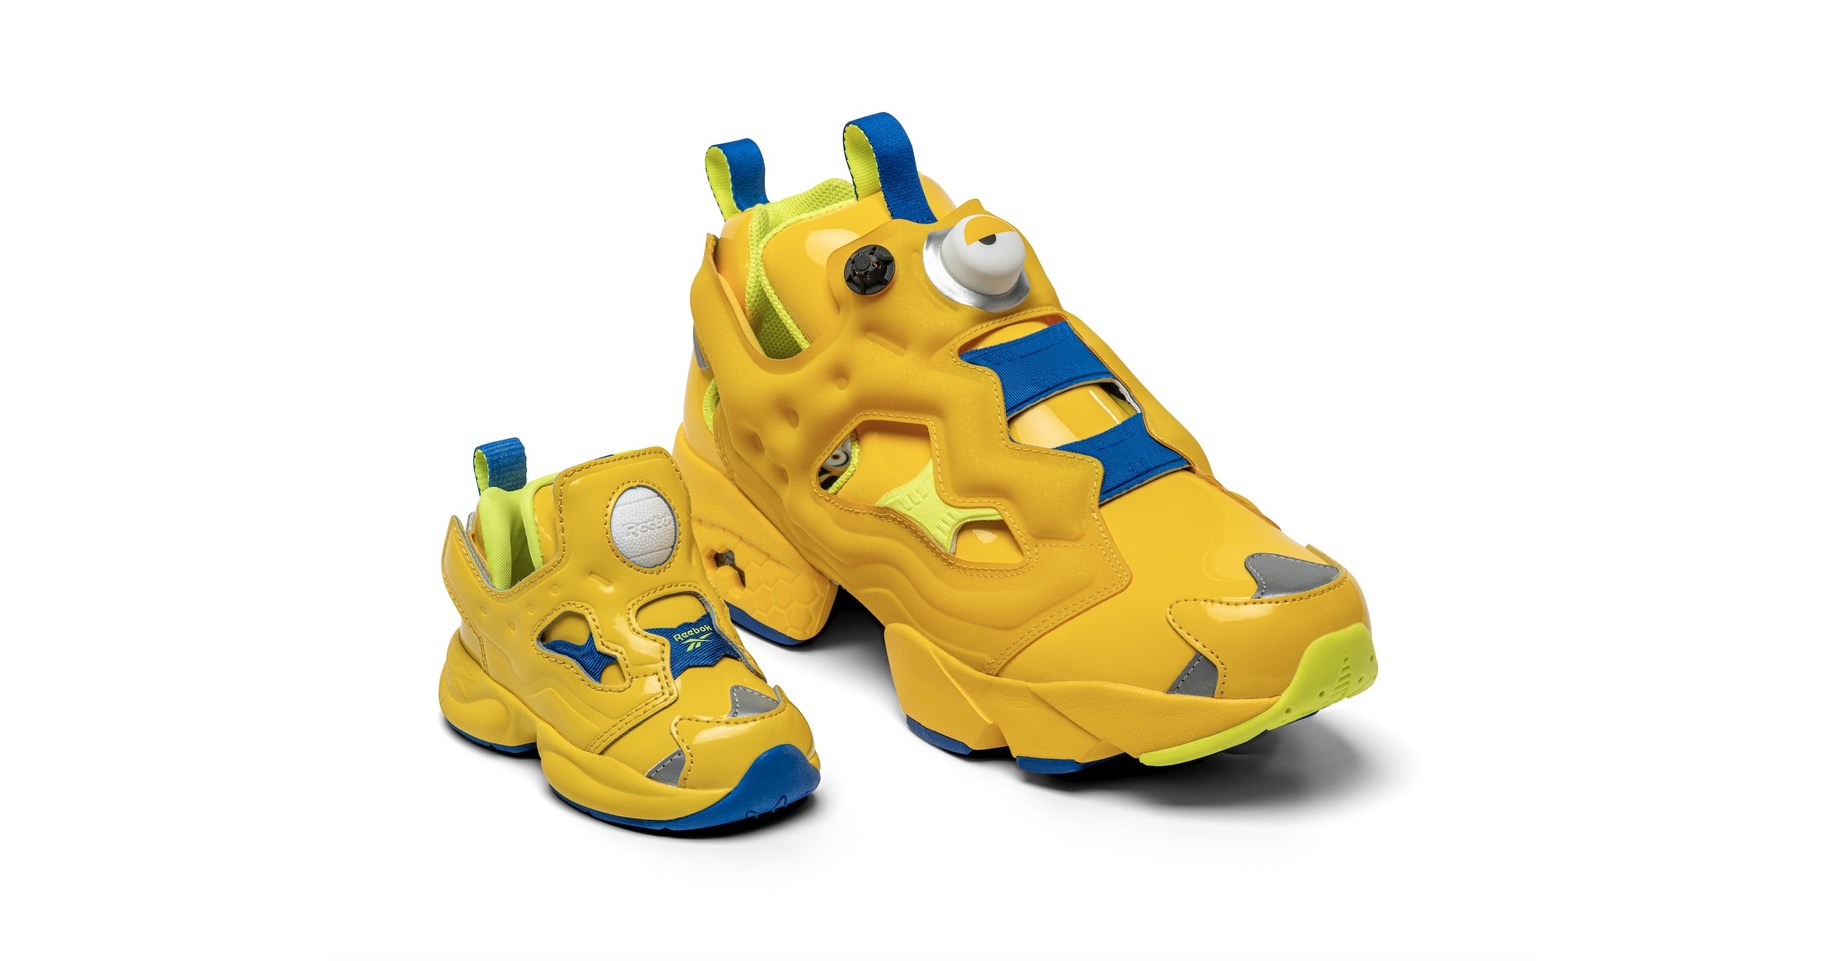 Reebok And Illumination "Minions: The Rise Gru" Footwear Collection Detailing A Young Gru's Dream The World's Greatest Supervillain, Available October 1